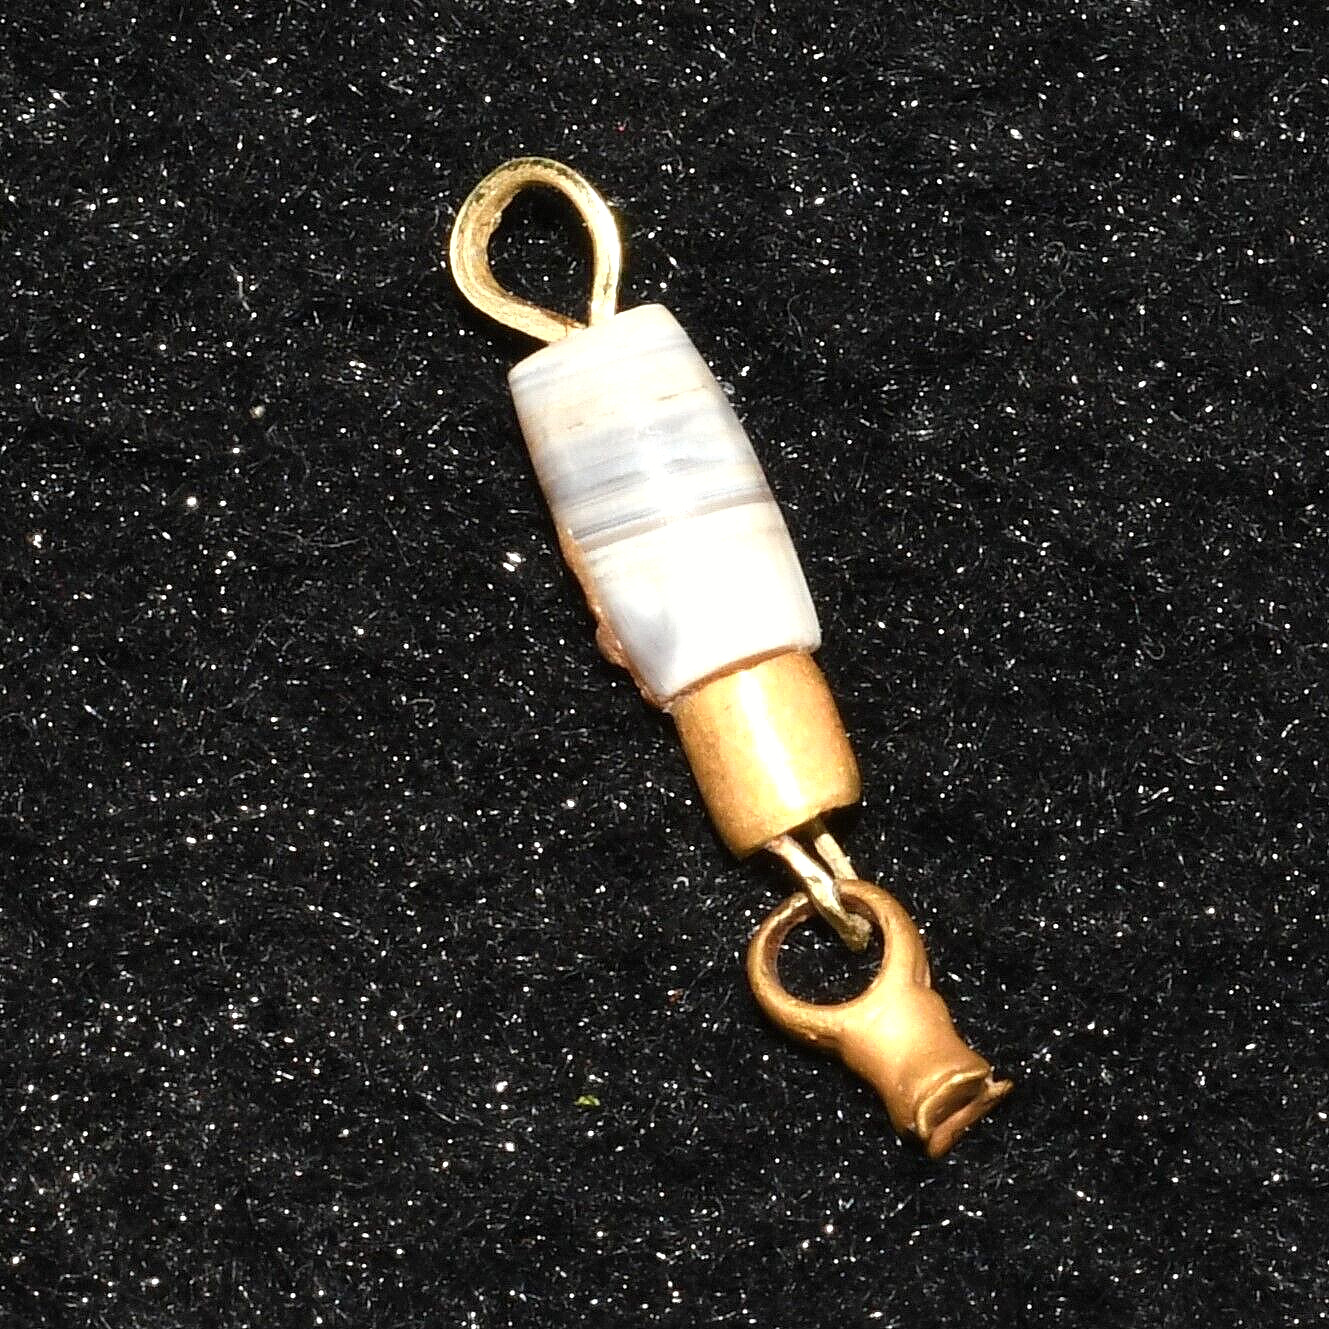 Genuine Ancient Roman Gold Pendant with agate Inlay Circa 1st-2nd Century AD